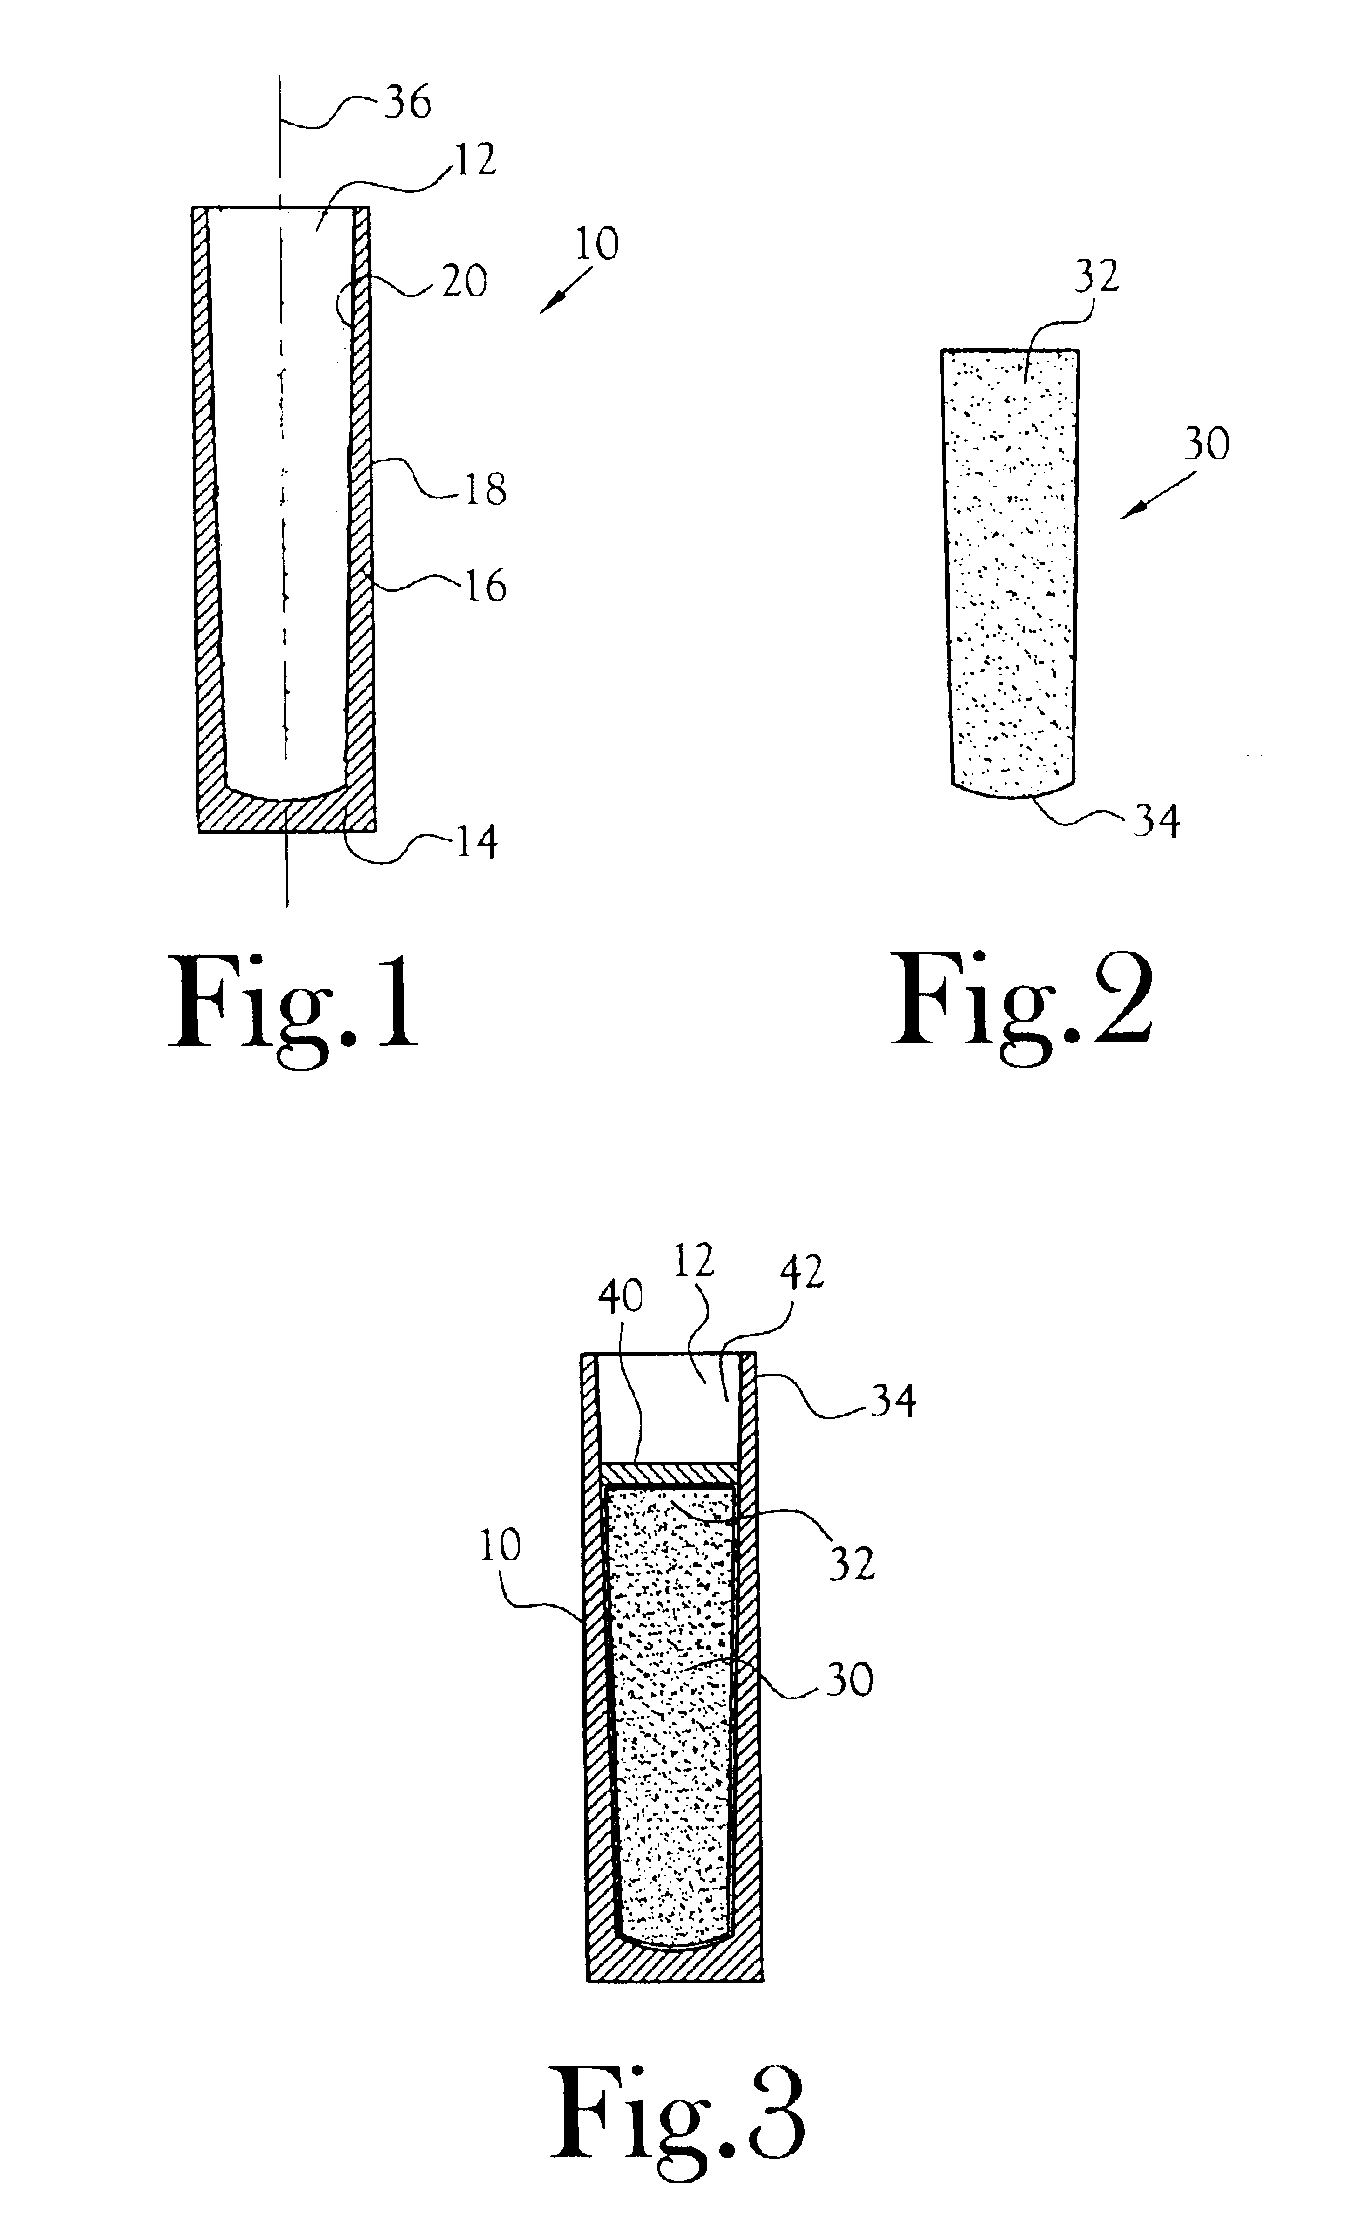 Tapered powder-based core for projectile